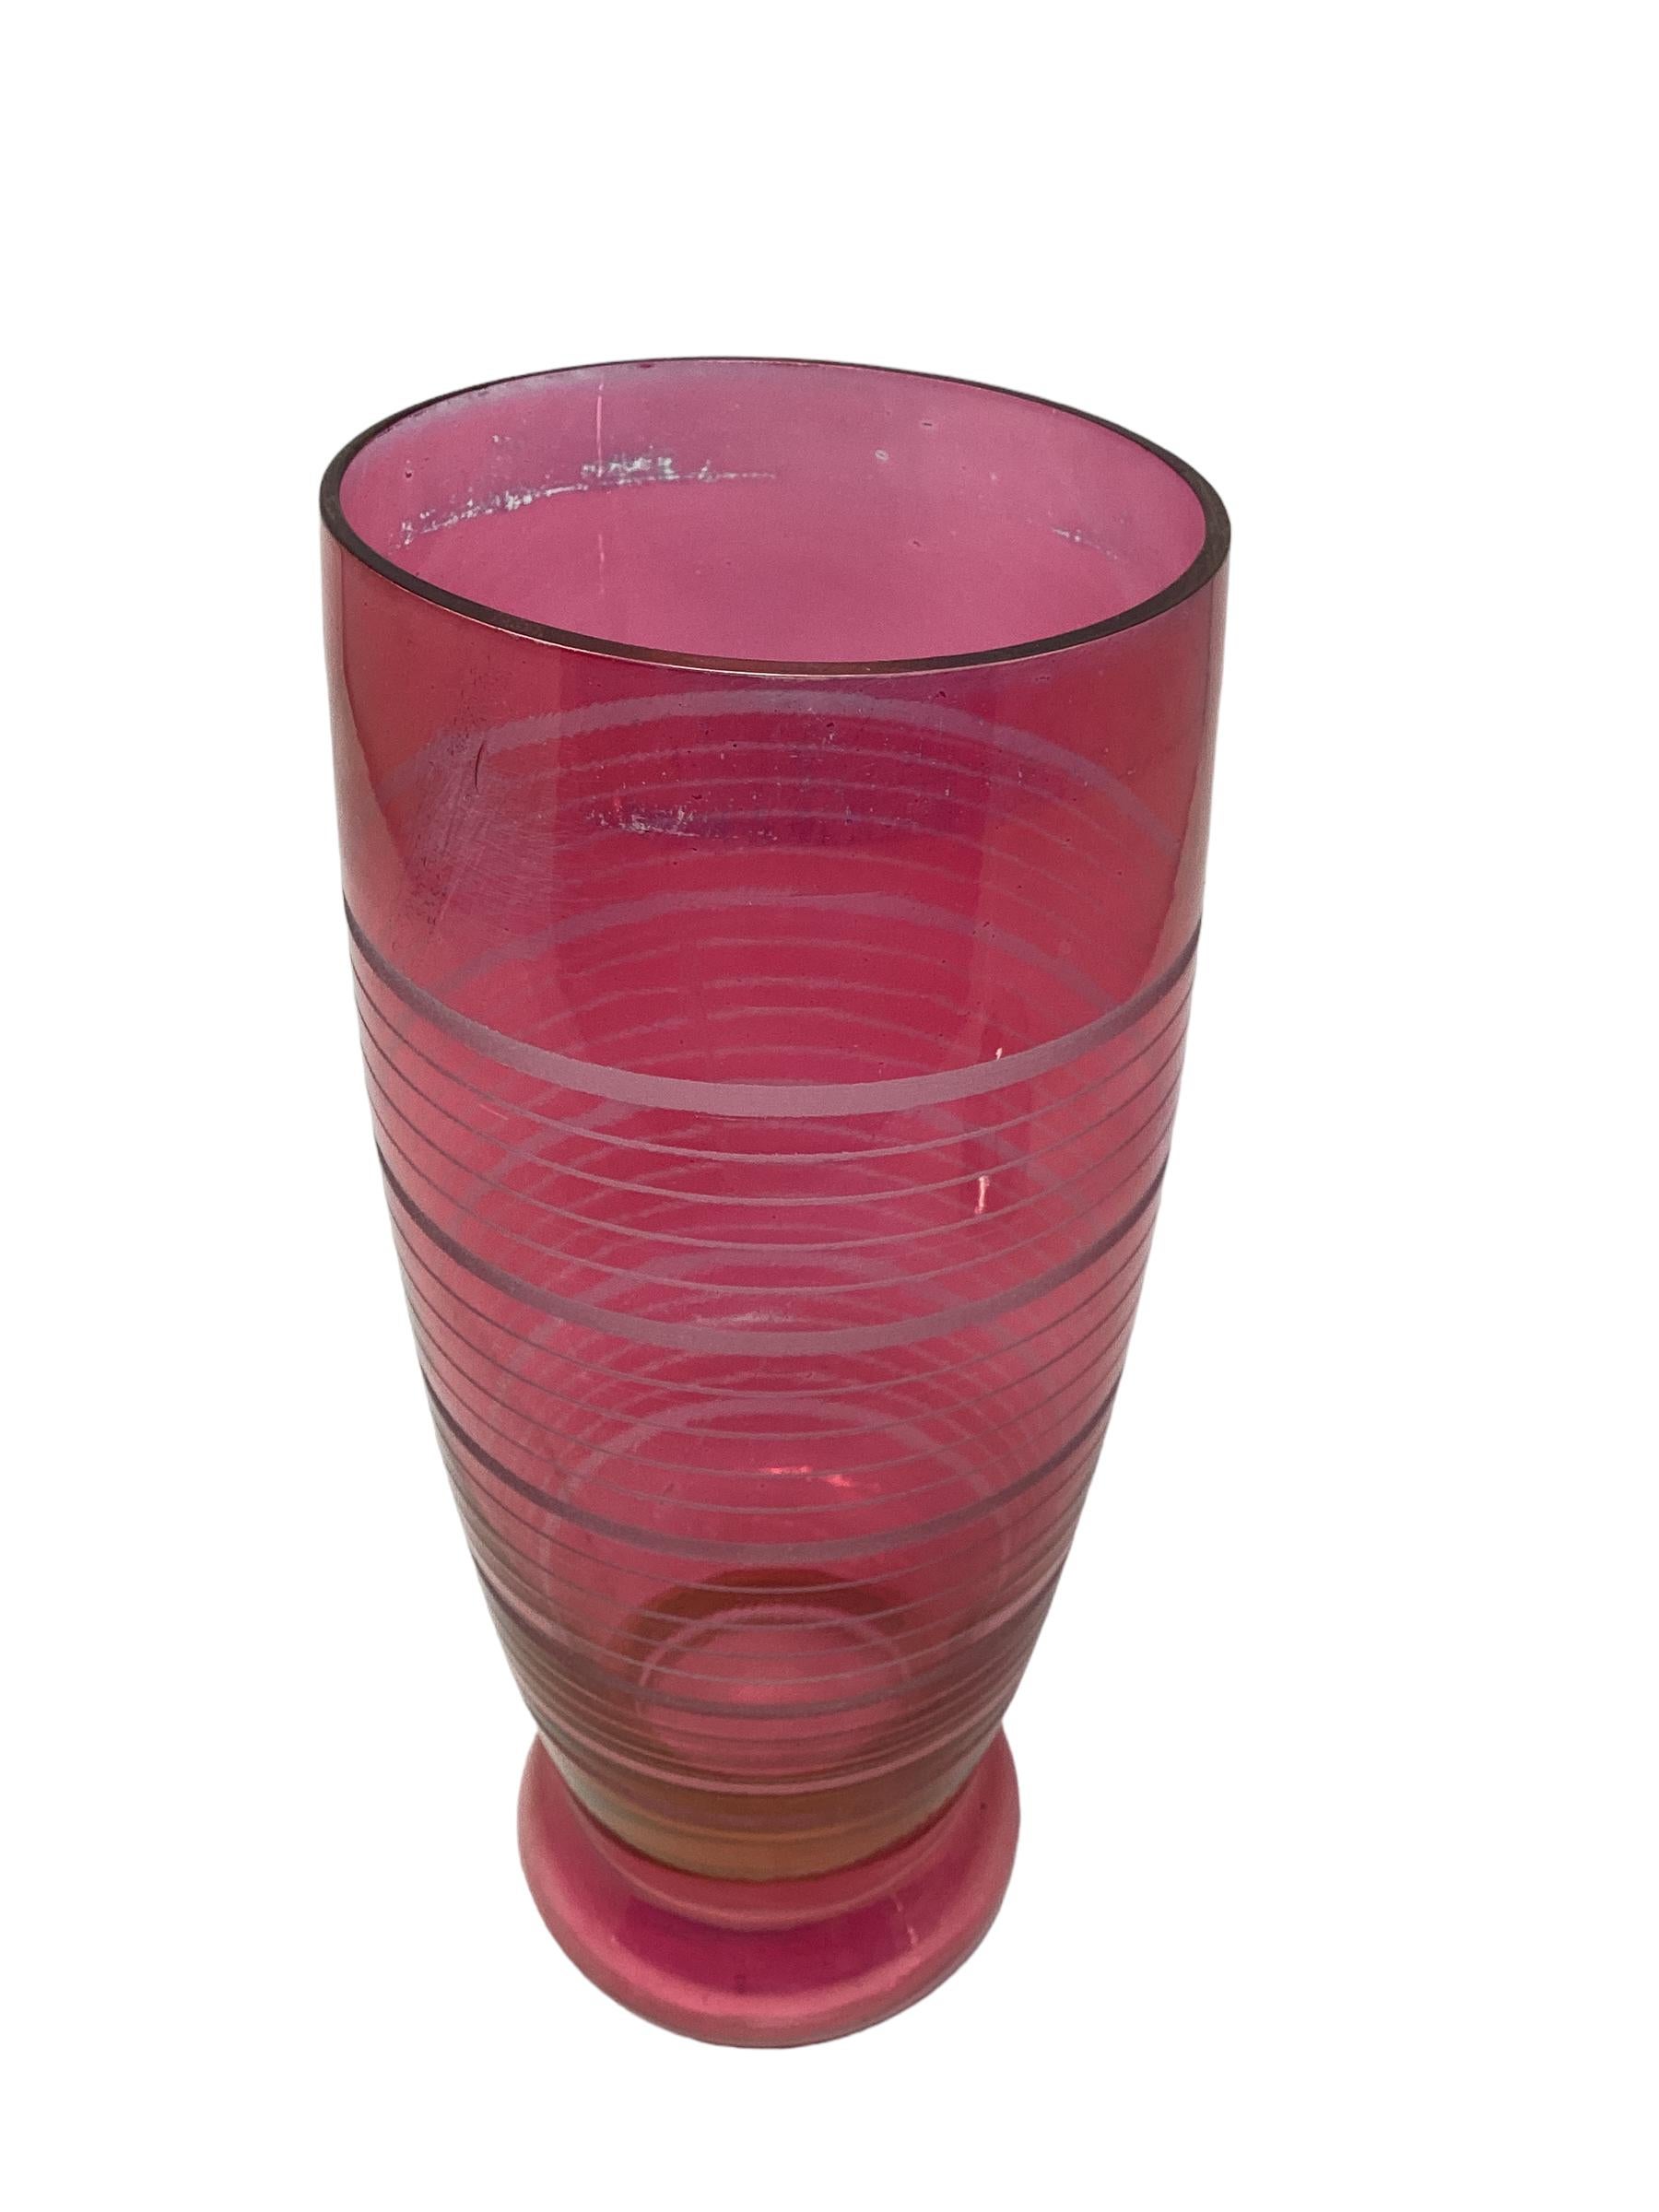 20th Century Art Deco Pink Flashed Cocktail Shaker with Etched Bands  For Sale